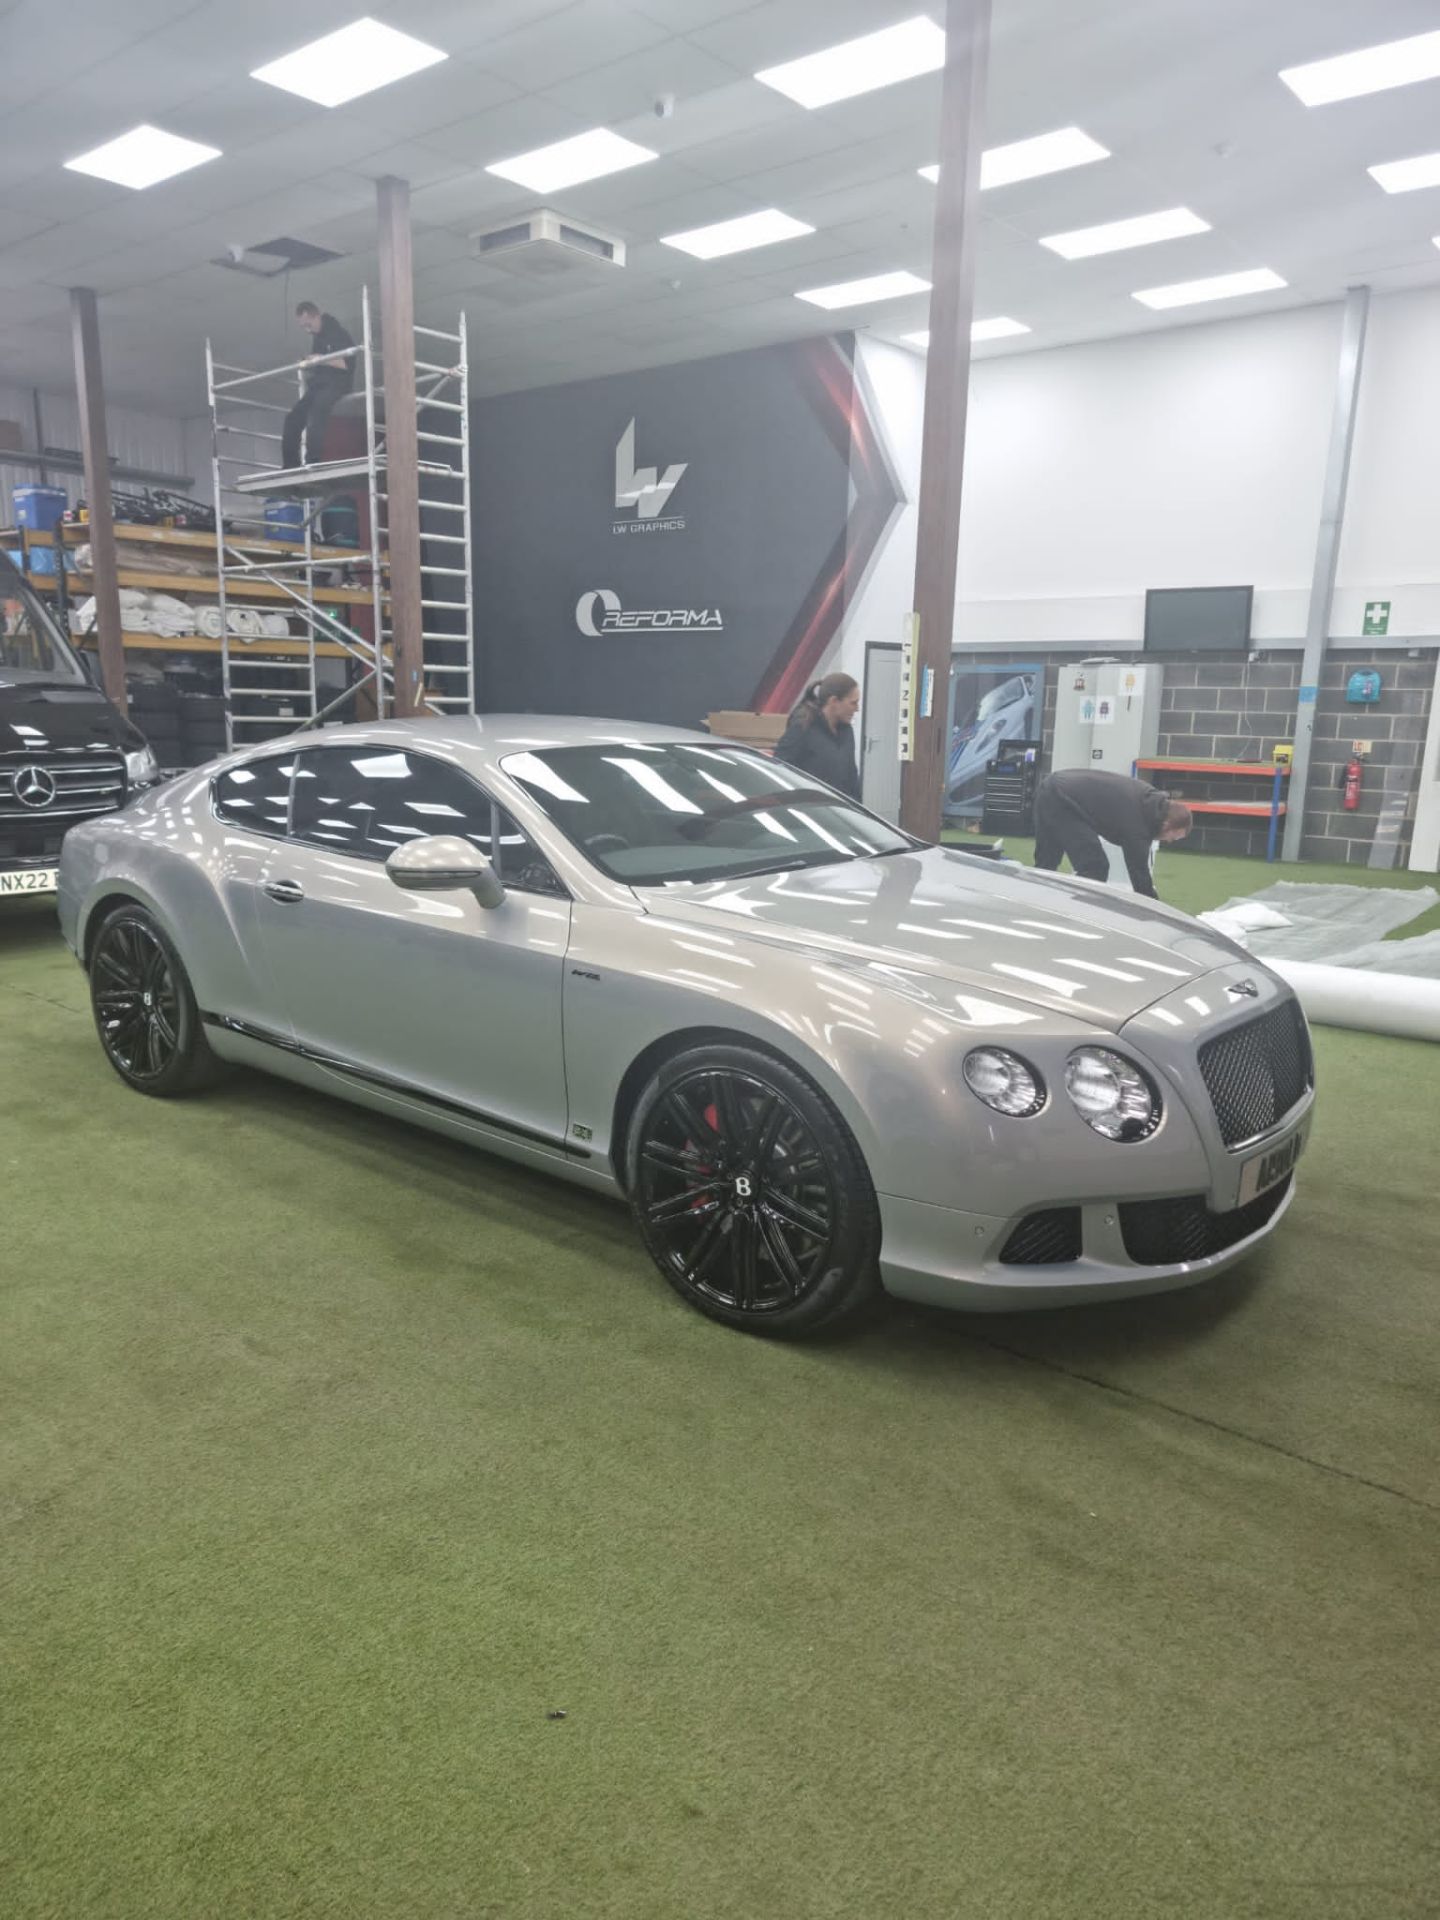 2013 BENTLEY CONTINENTAL GT SPEED AUTO GREY COUPE, 56k miles, 626 BHP, 5998 cc PETROL - Image 4 of 16